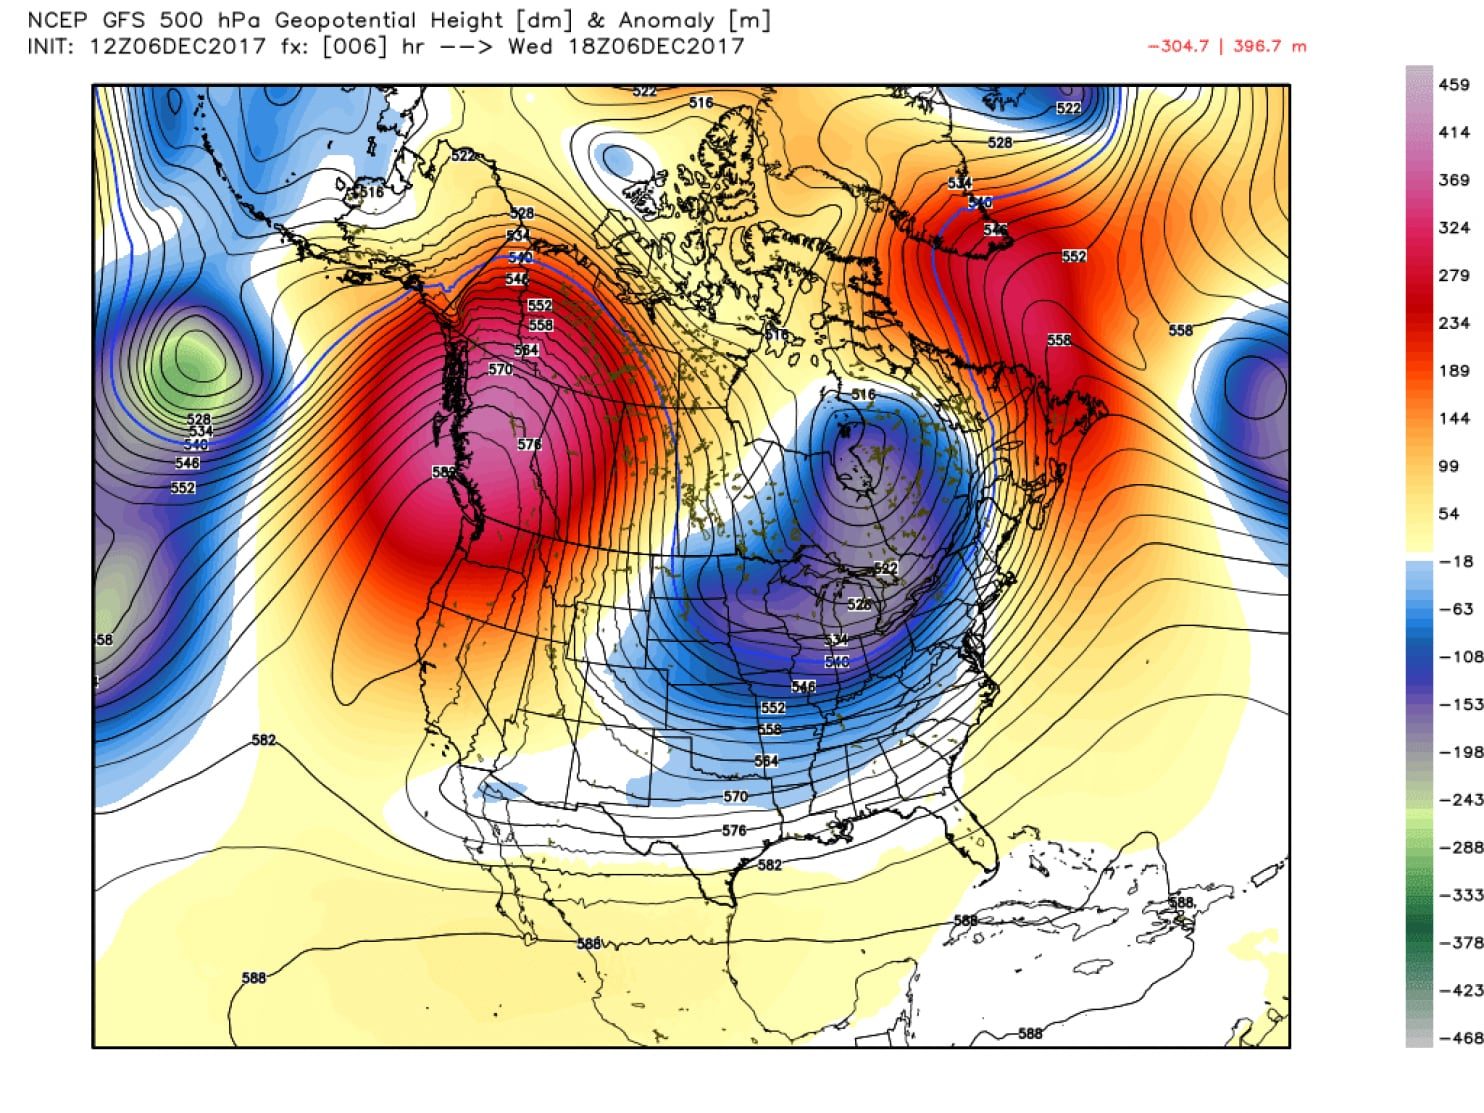 The North American Winter Dipole Pattern with a large ridge of high pressure in the Western U.S., and deep trough in the Eastern U.S., which aided in the formation of the atmospheric river on Wednesday.